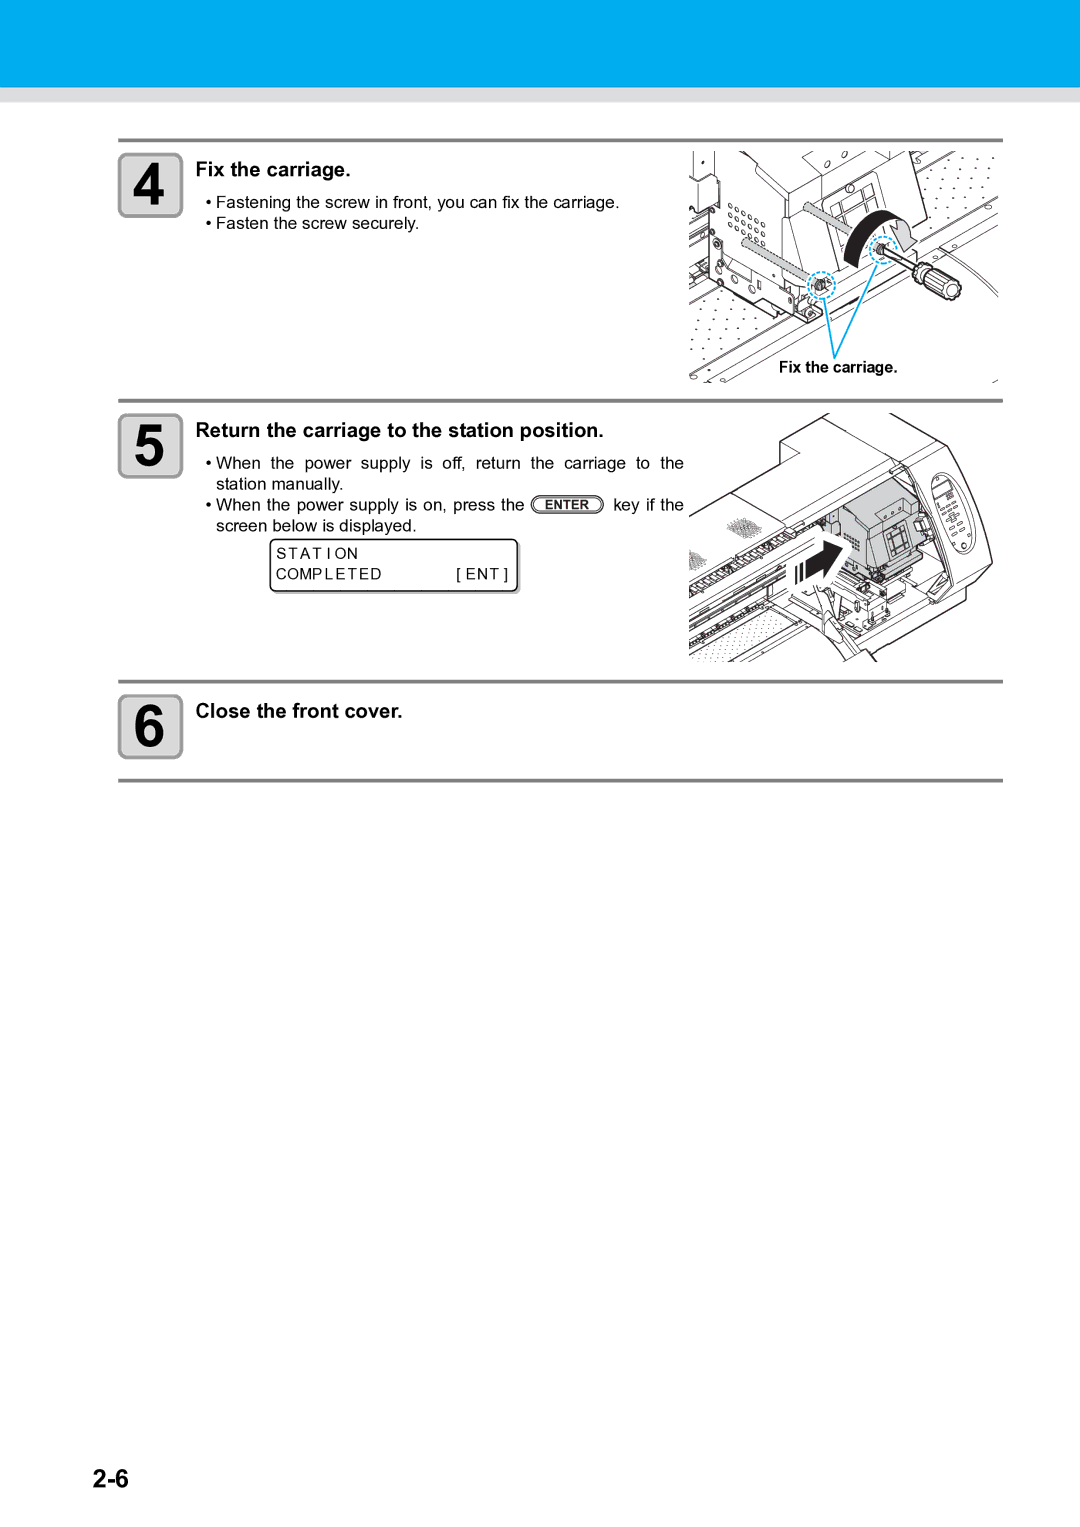 Ricoh L4130, L4160 operation manual Fix the carriage, Return the carriage to the station position, Close the front cover 